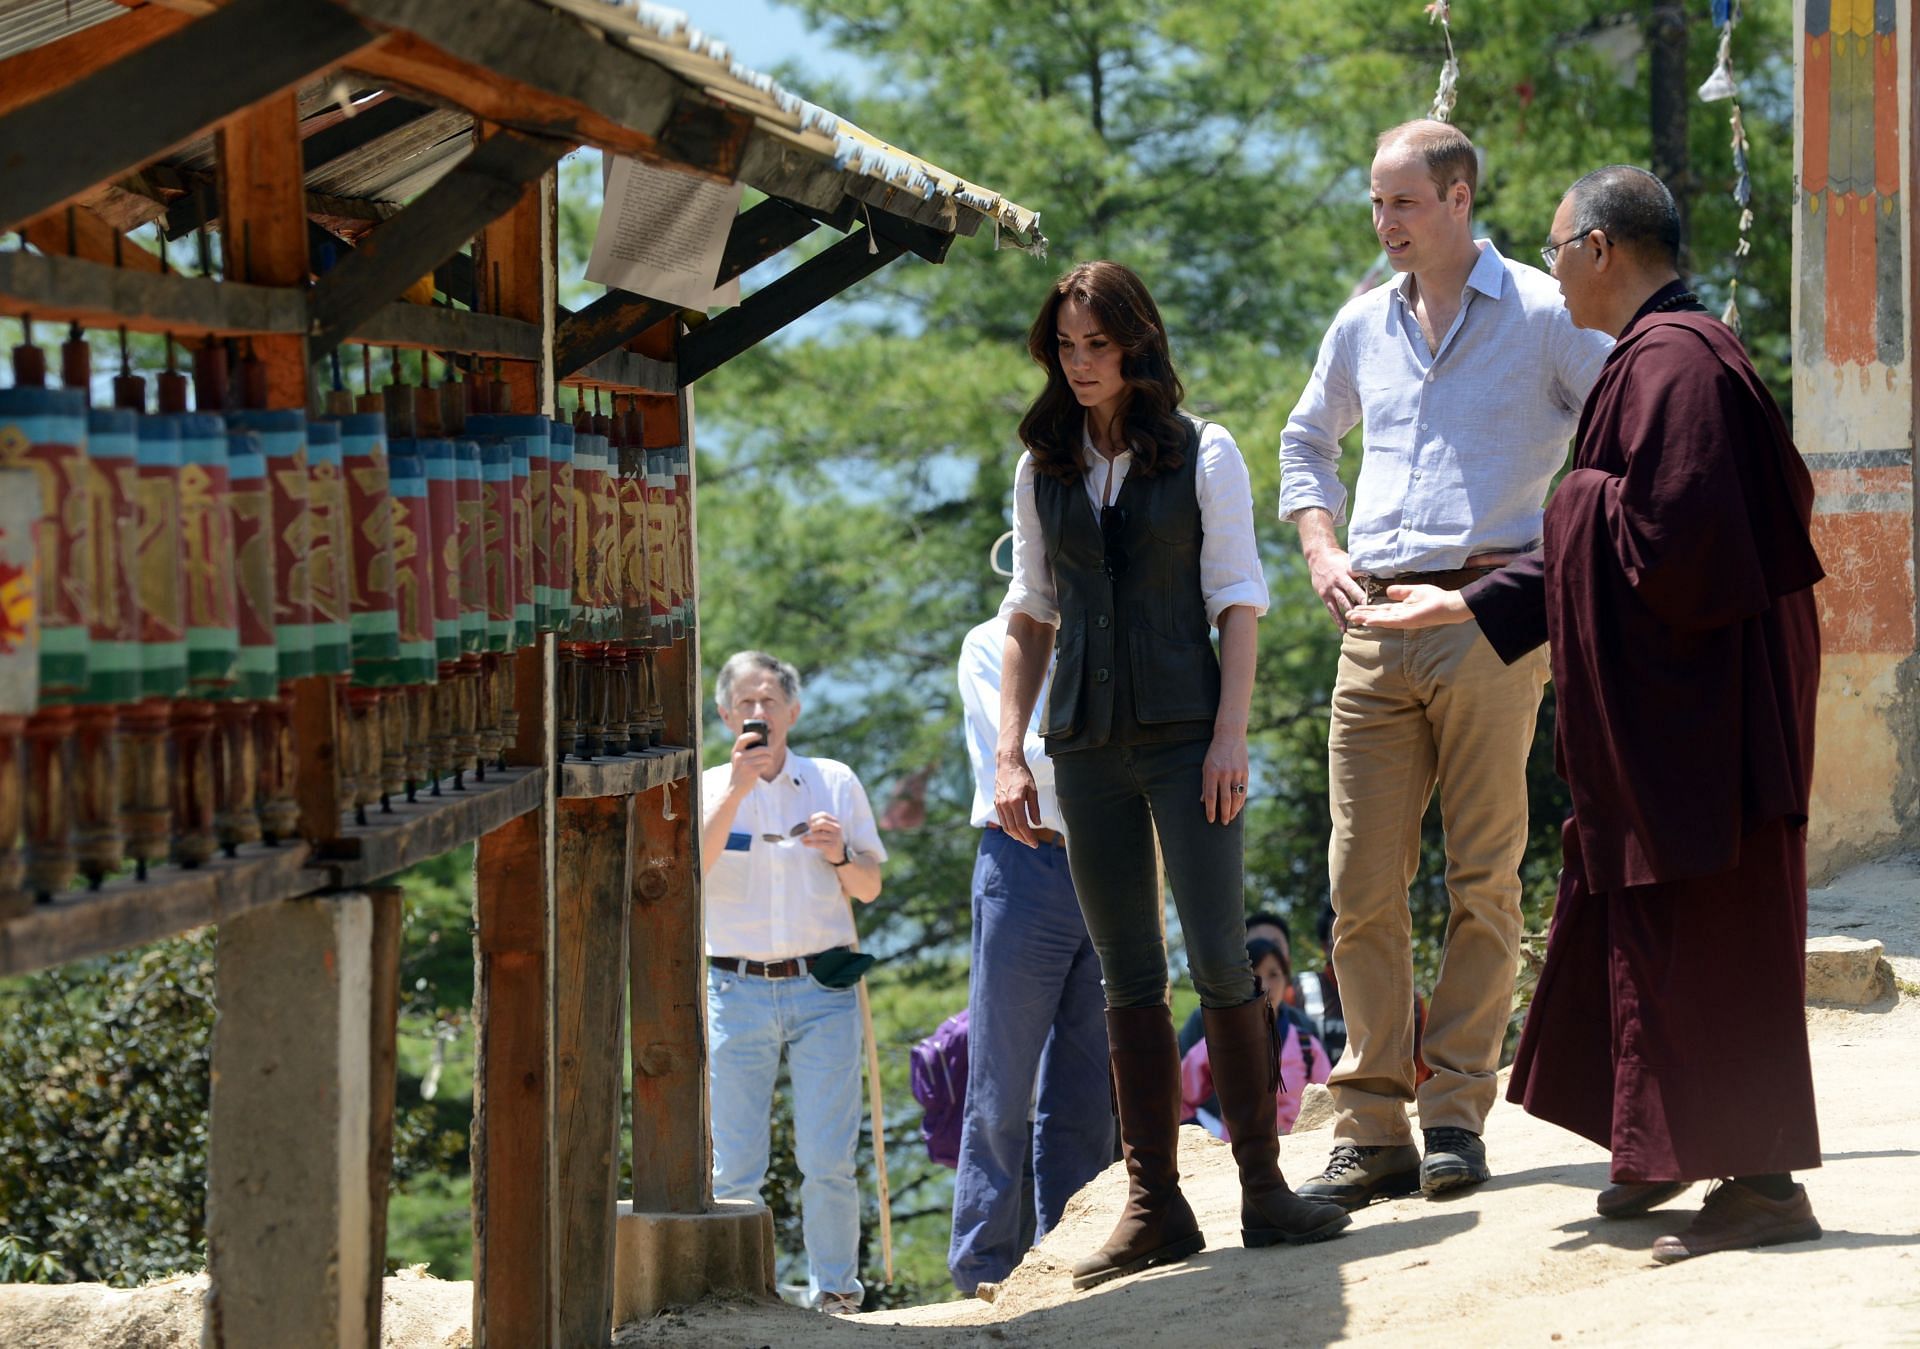 The Duke and Duchess Of Cambridge visited India and Bhutan in 2016 (Image via Getty)